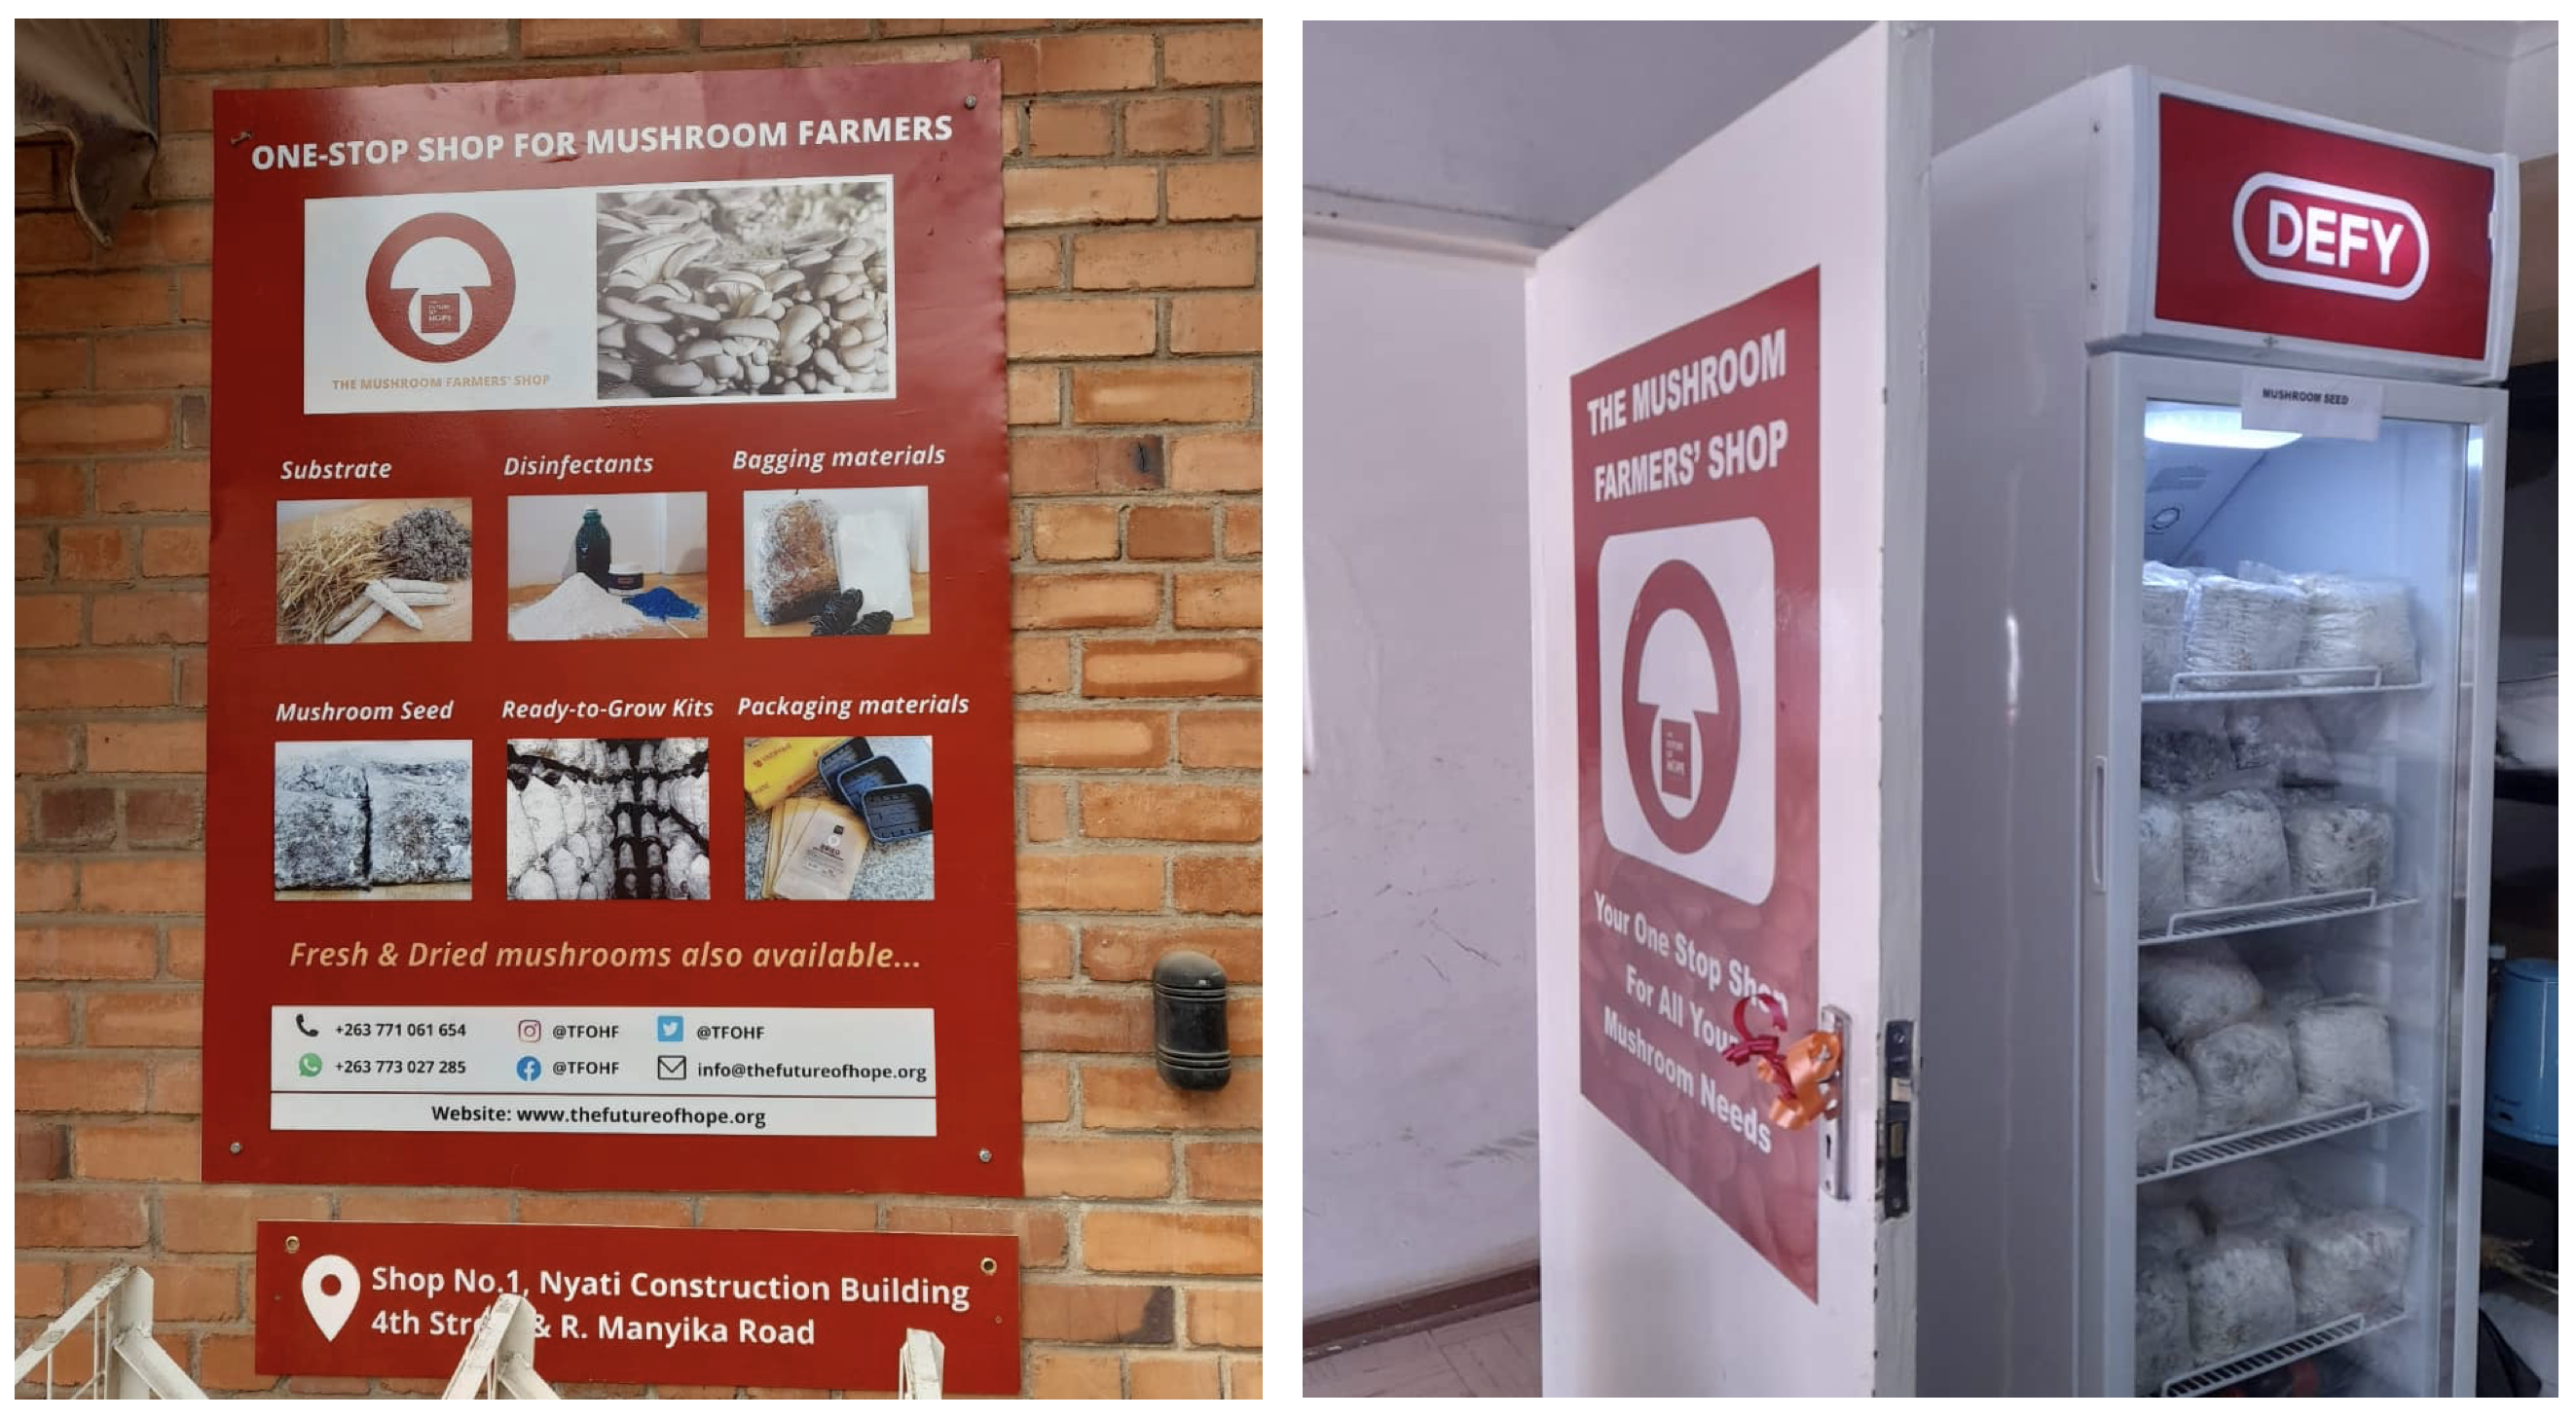 On the left, a poster for the one-stop shop for mushroom farmers; on the right, a refrigerator with mushroom inside